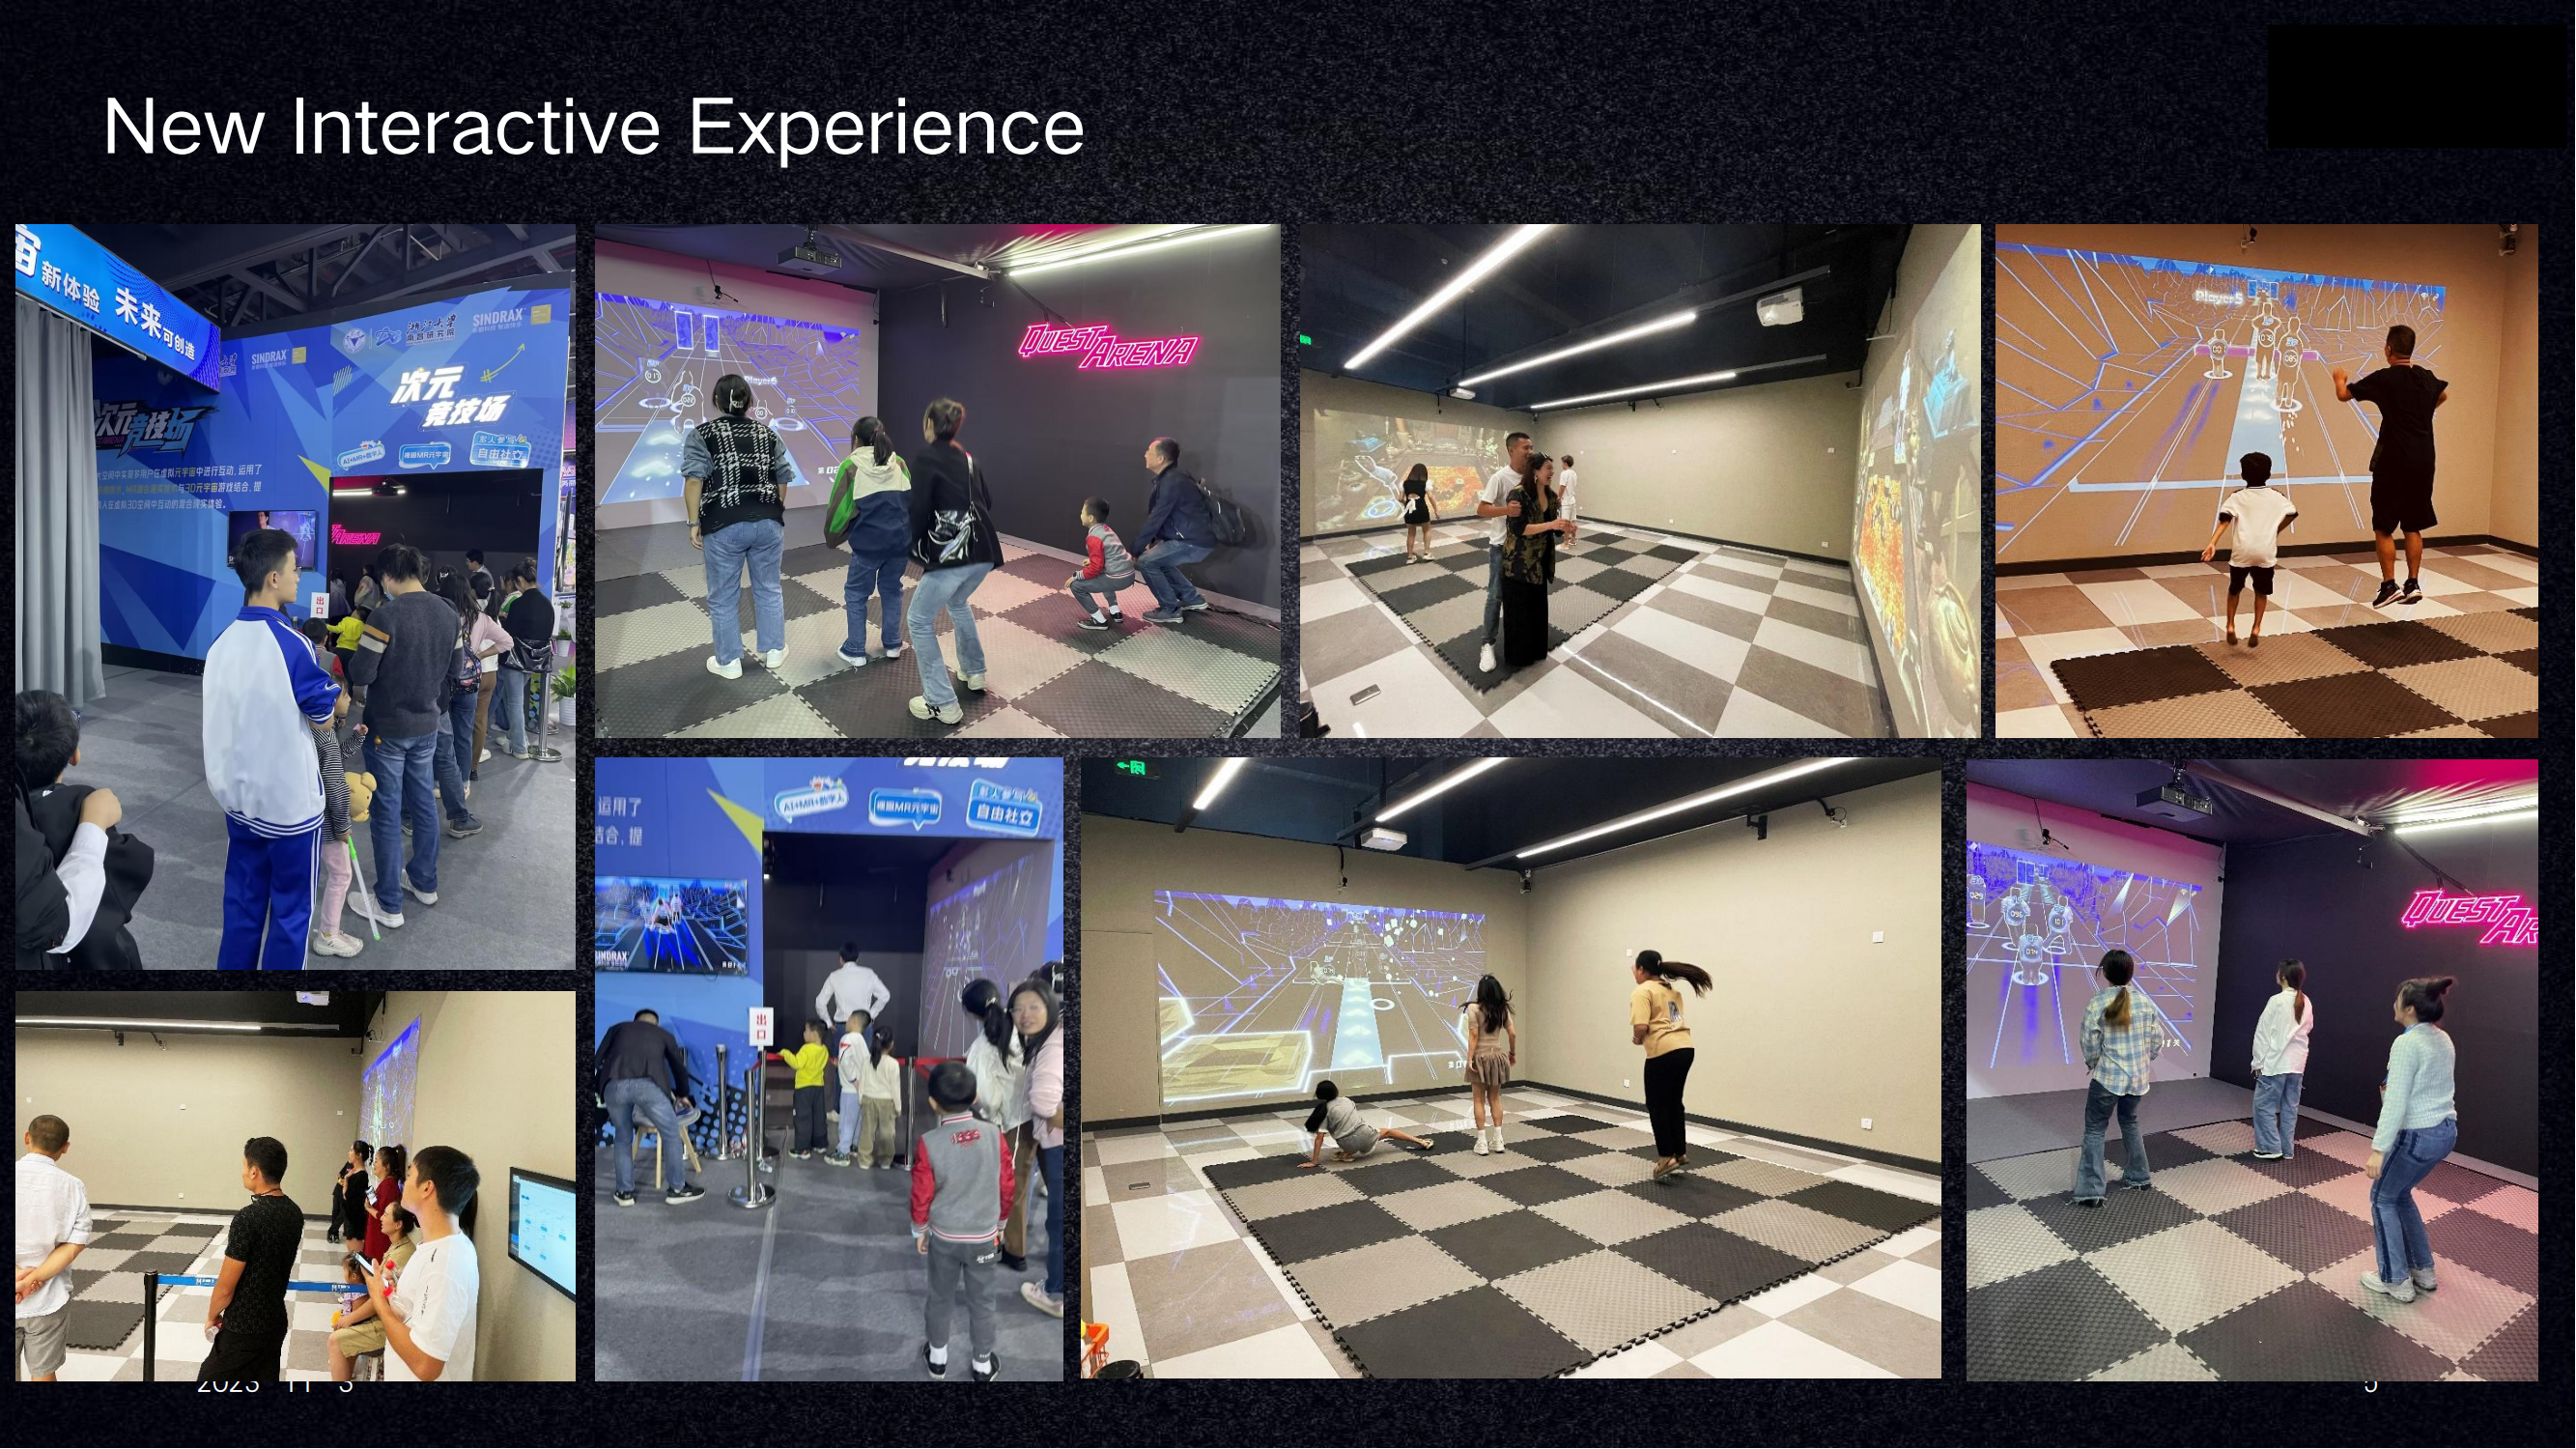 Immersive Multiplayer MR Interactive Gaming Space